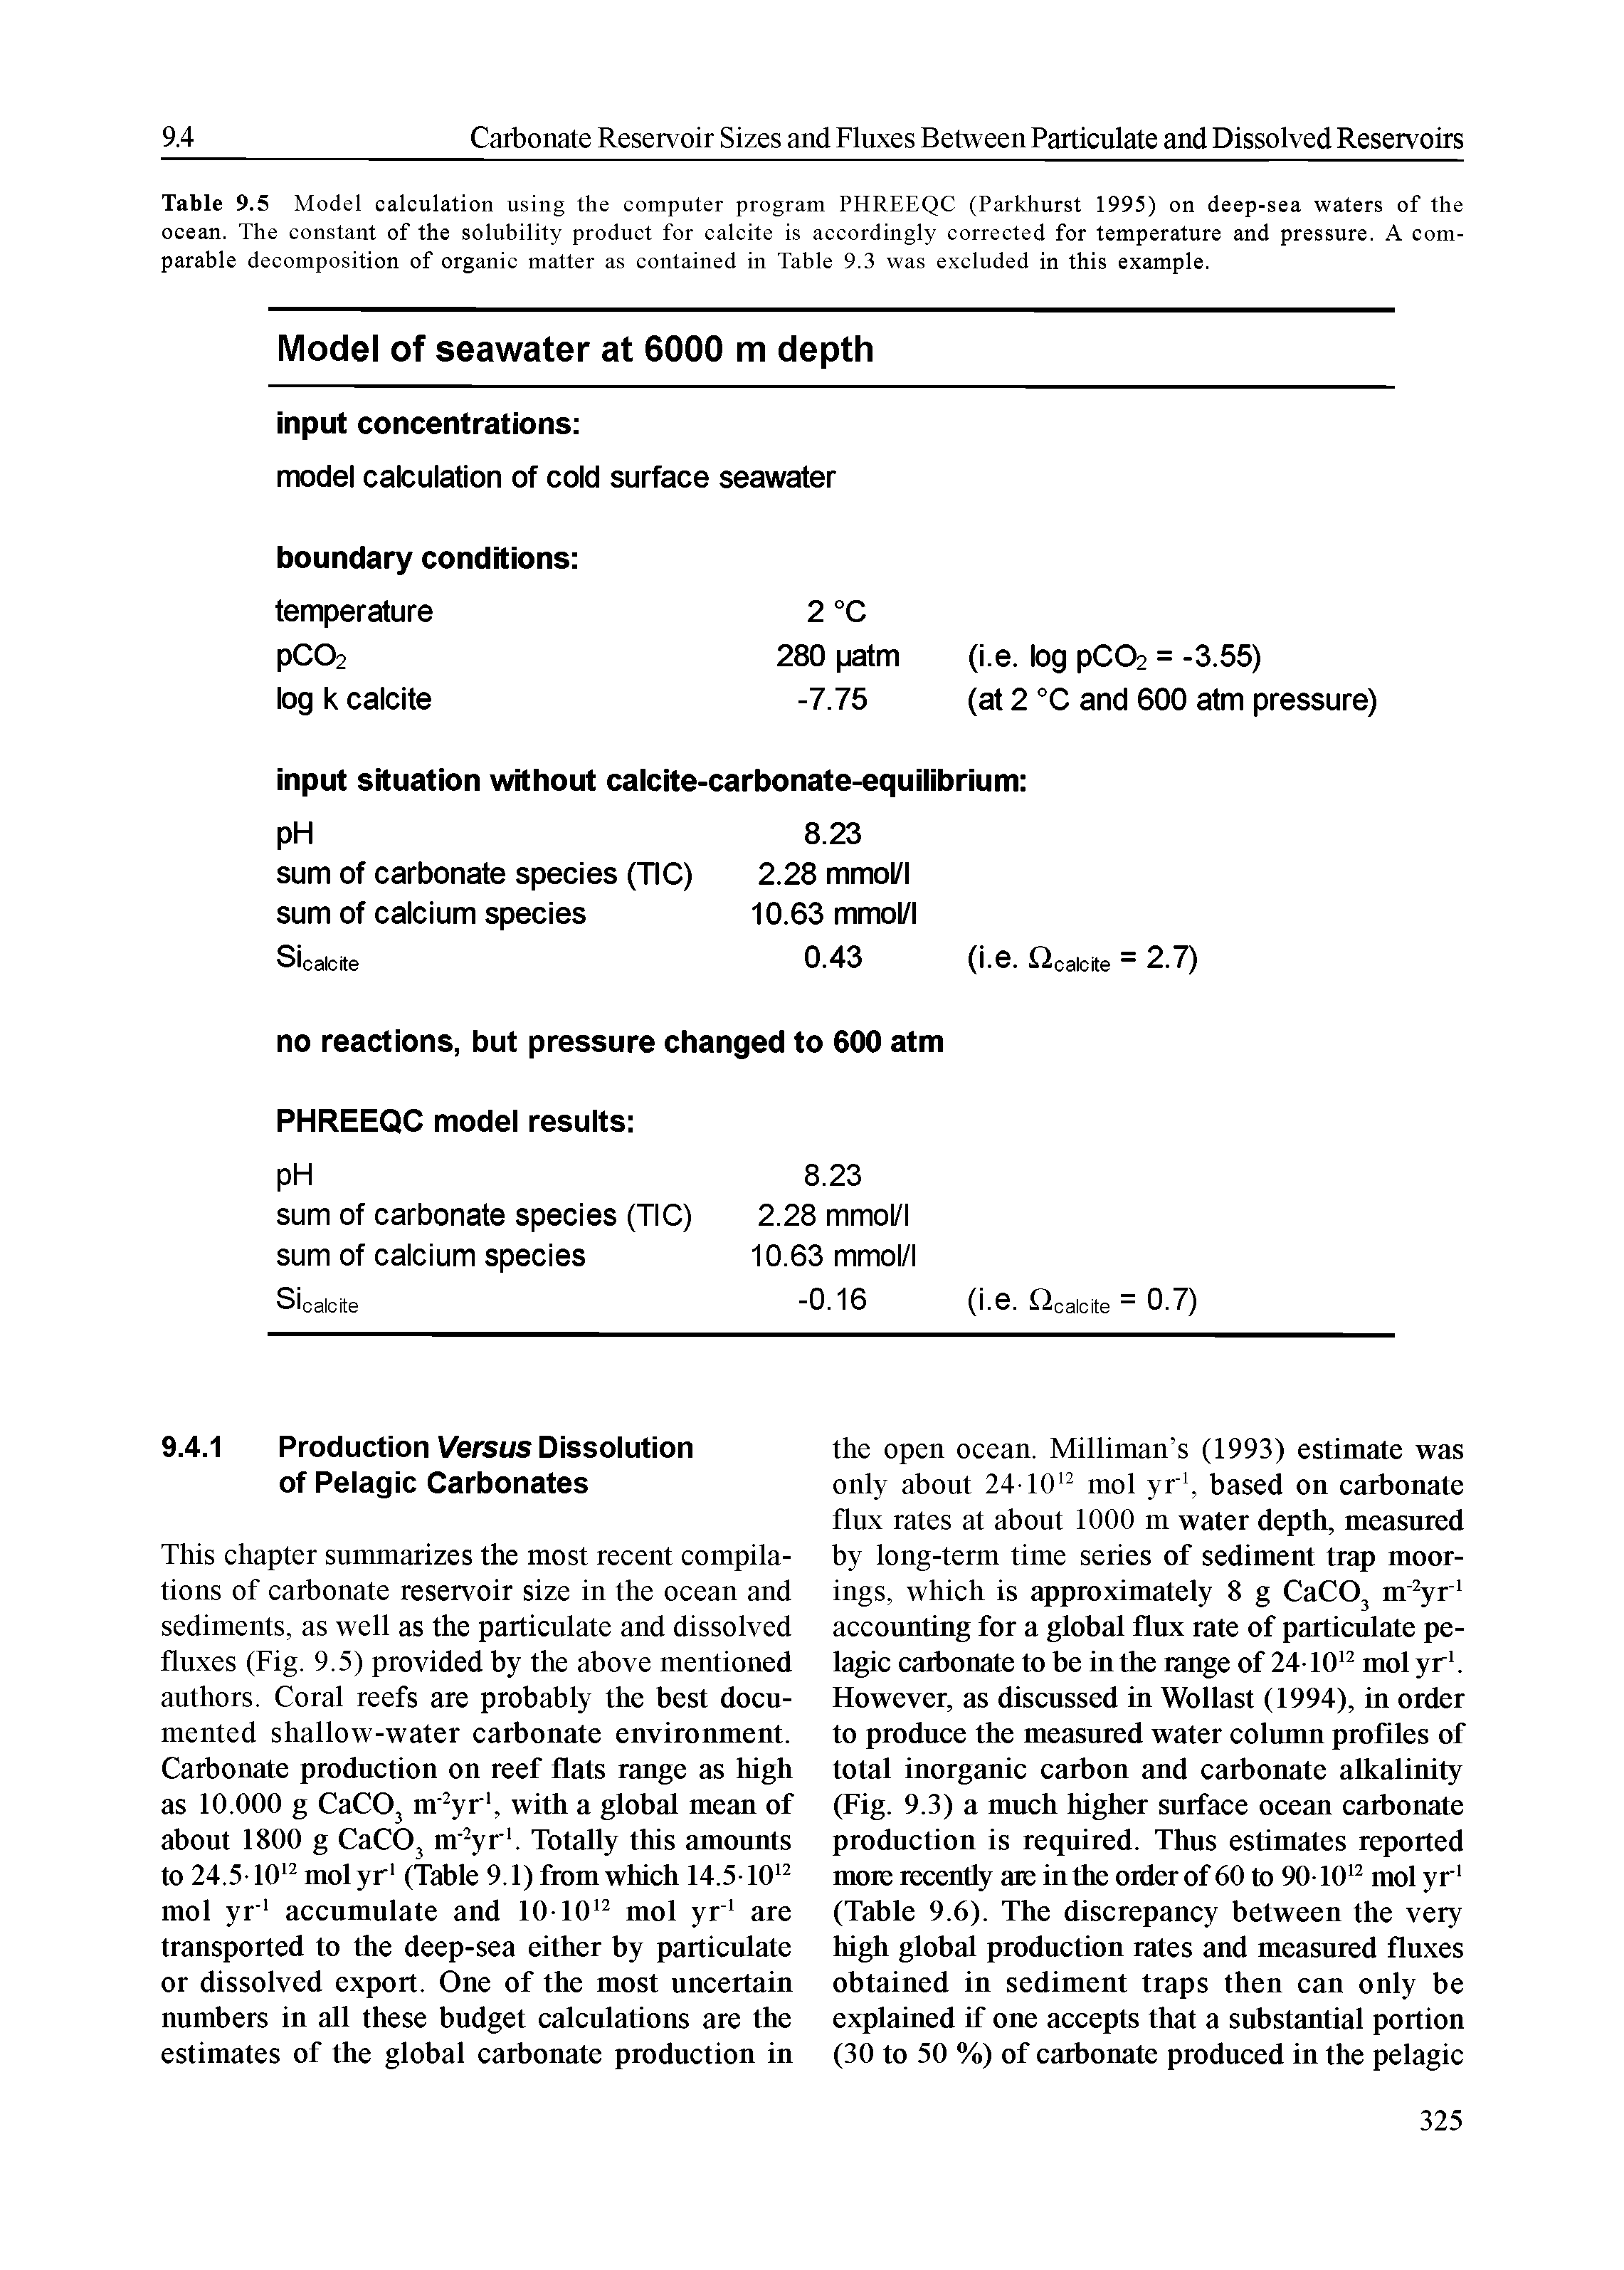 Table 9.5 Model calculation using the computer program PHREEQC (Parkhurst 1995) on deep-sea waters of the ocean. The constant of the solubility product for calcite is accordingly corrected for temperature and pressure. A comparable decomposition of organic matter as contained in Table 9.3 was excluded in this example.